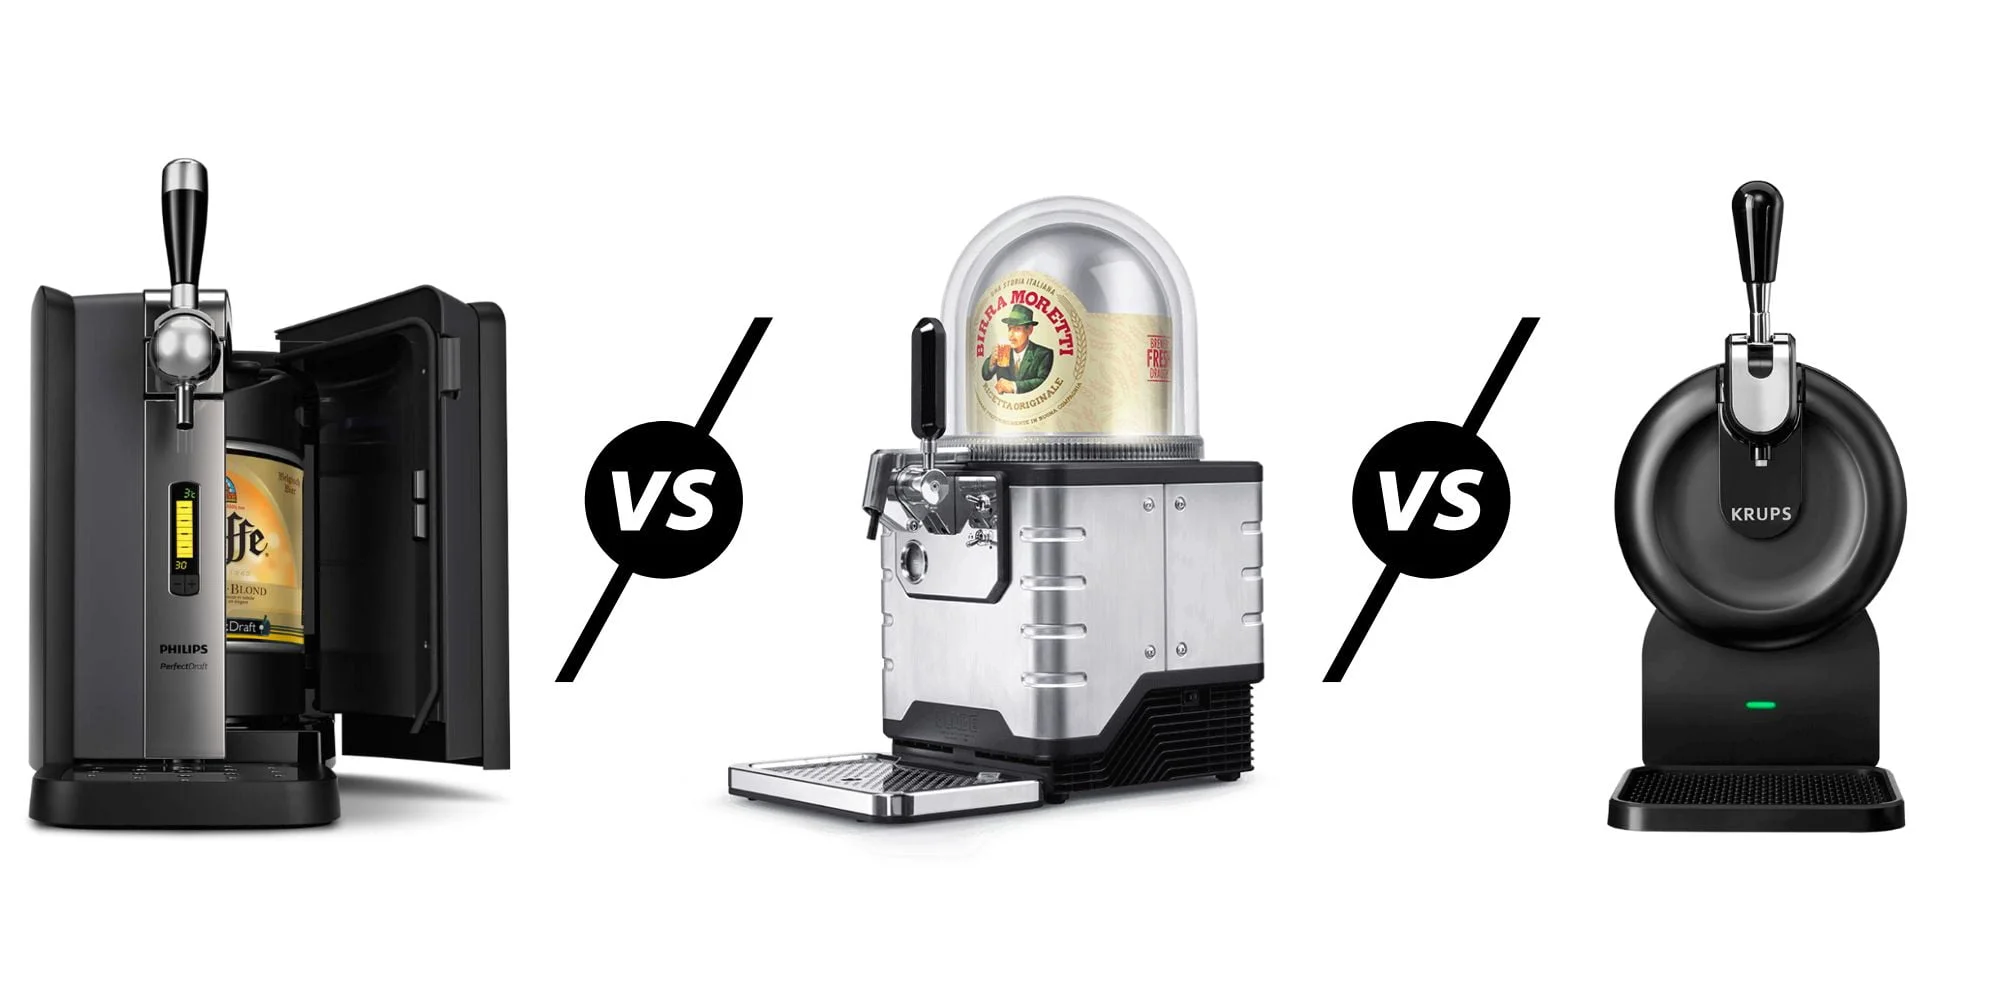 PerfectDraft vs Blade vs Krups Sub vs Salter / Beer Monster Draft Beer Tap Comparison – Which is best, and what’s the price of a pint?